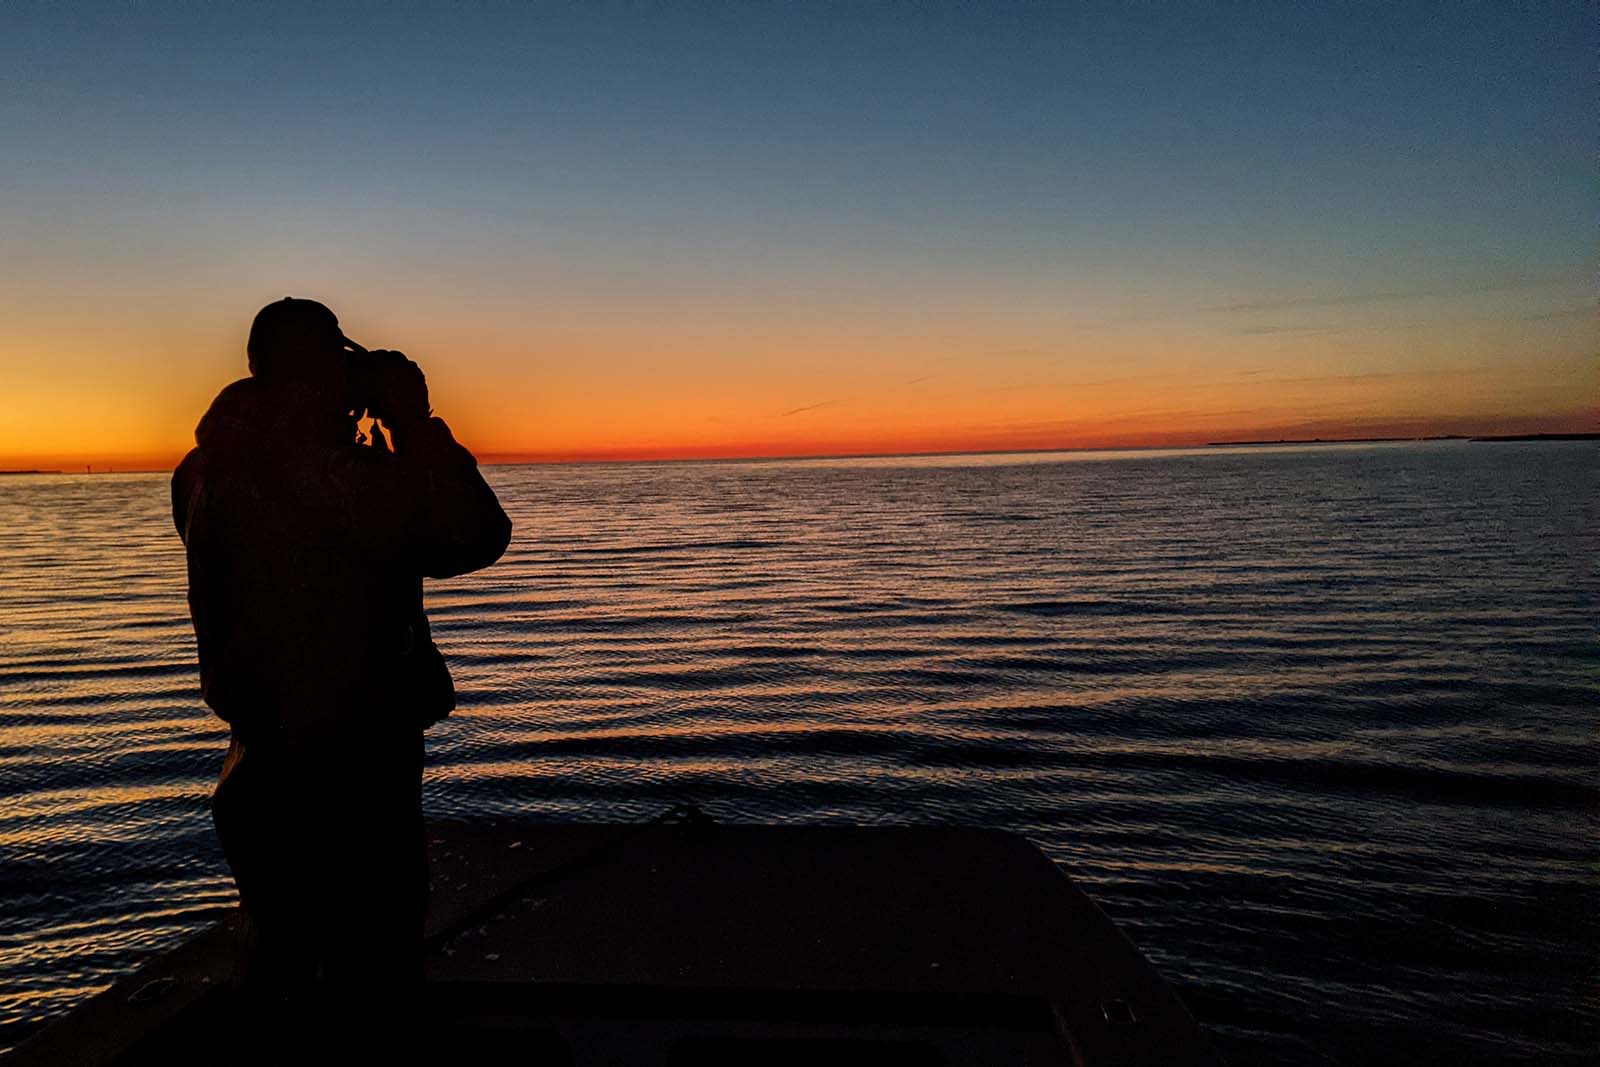 A Conservation Police Officer standing on a platform at dawn and looking through binoculars out over the water